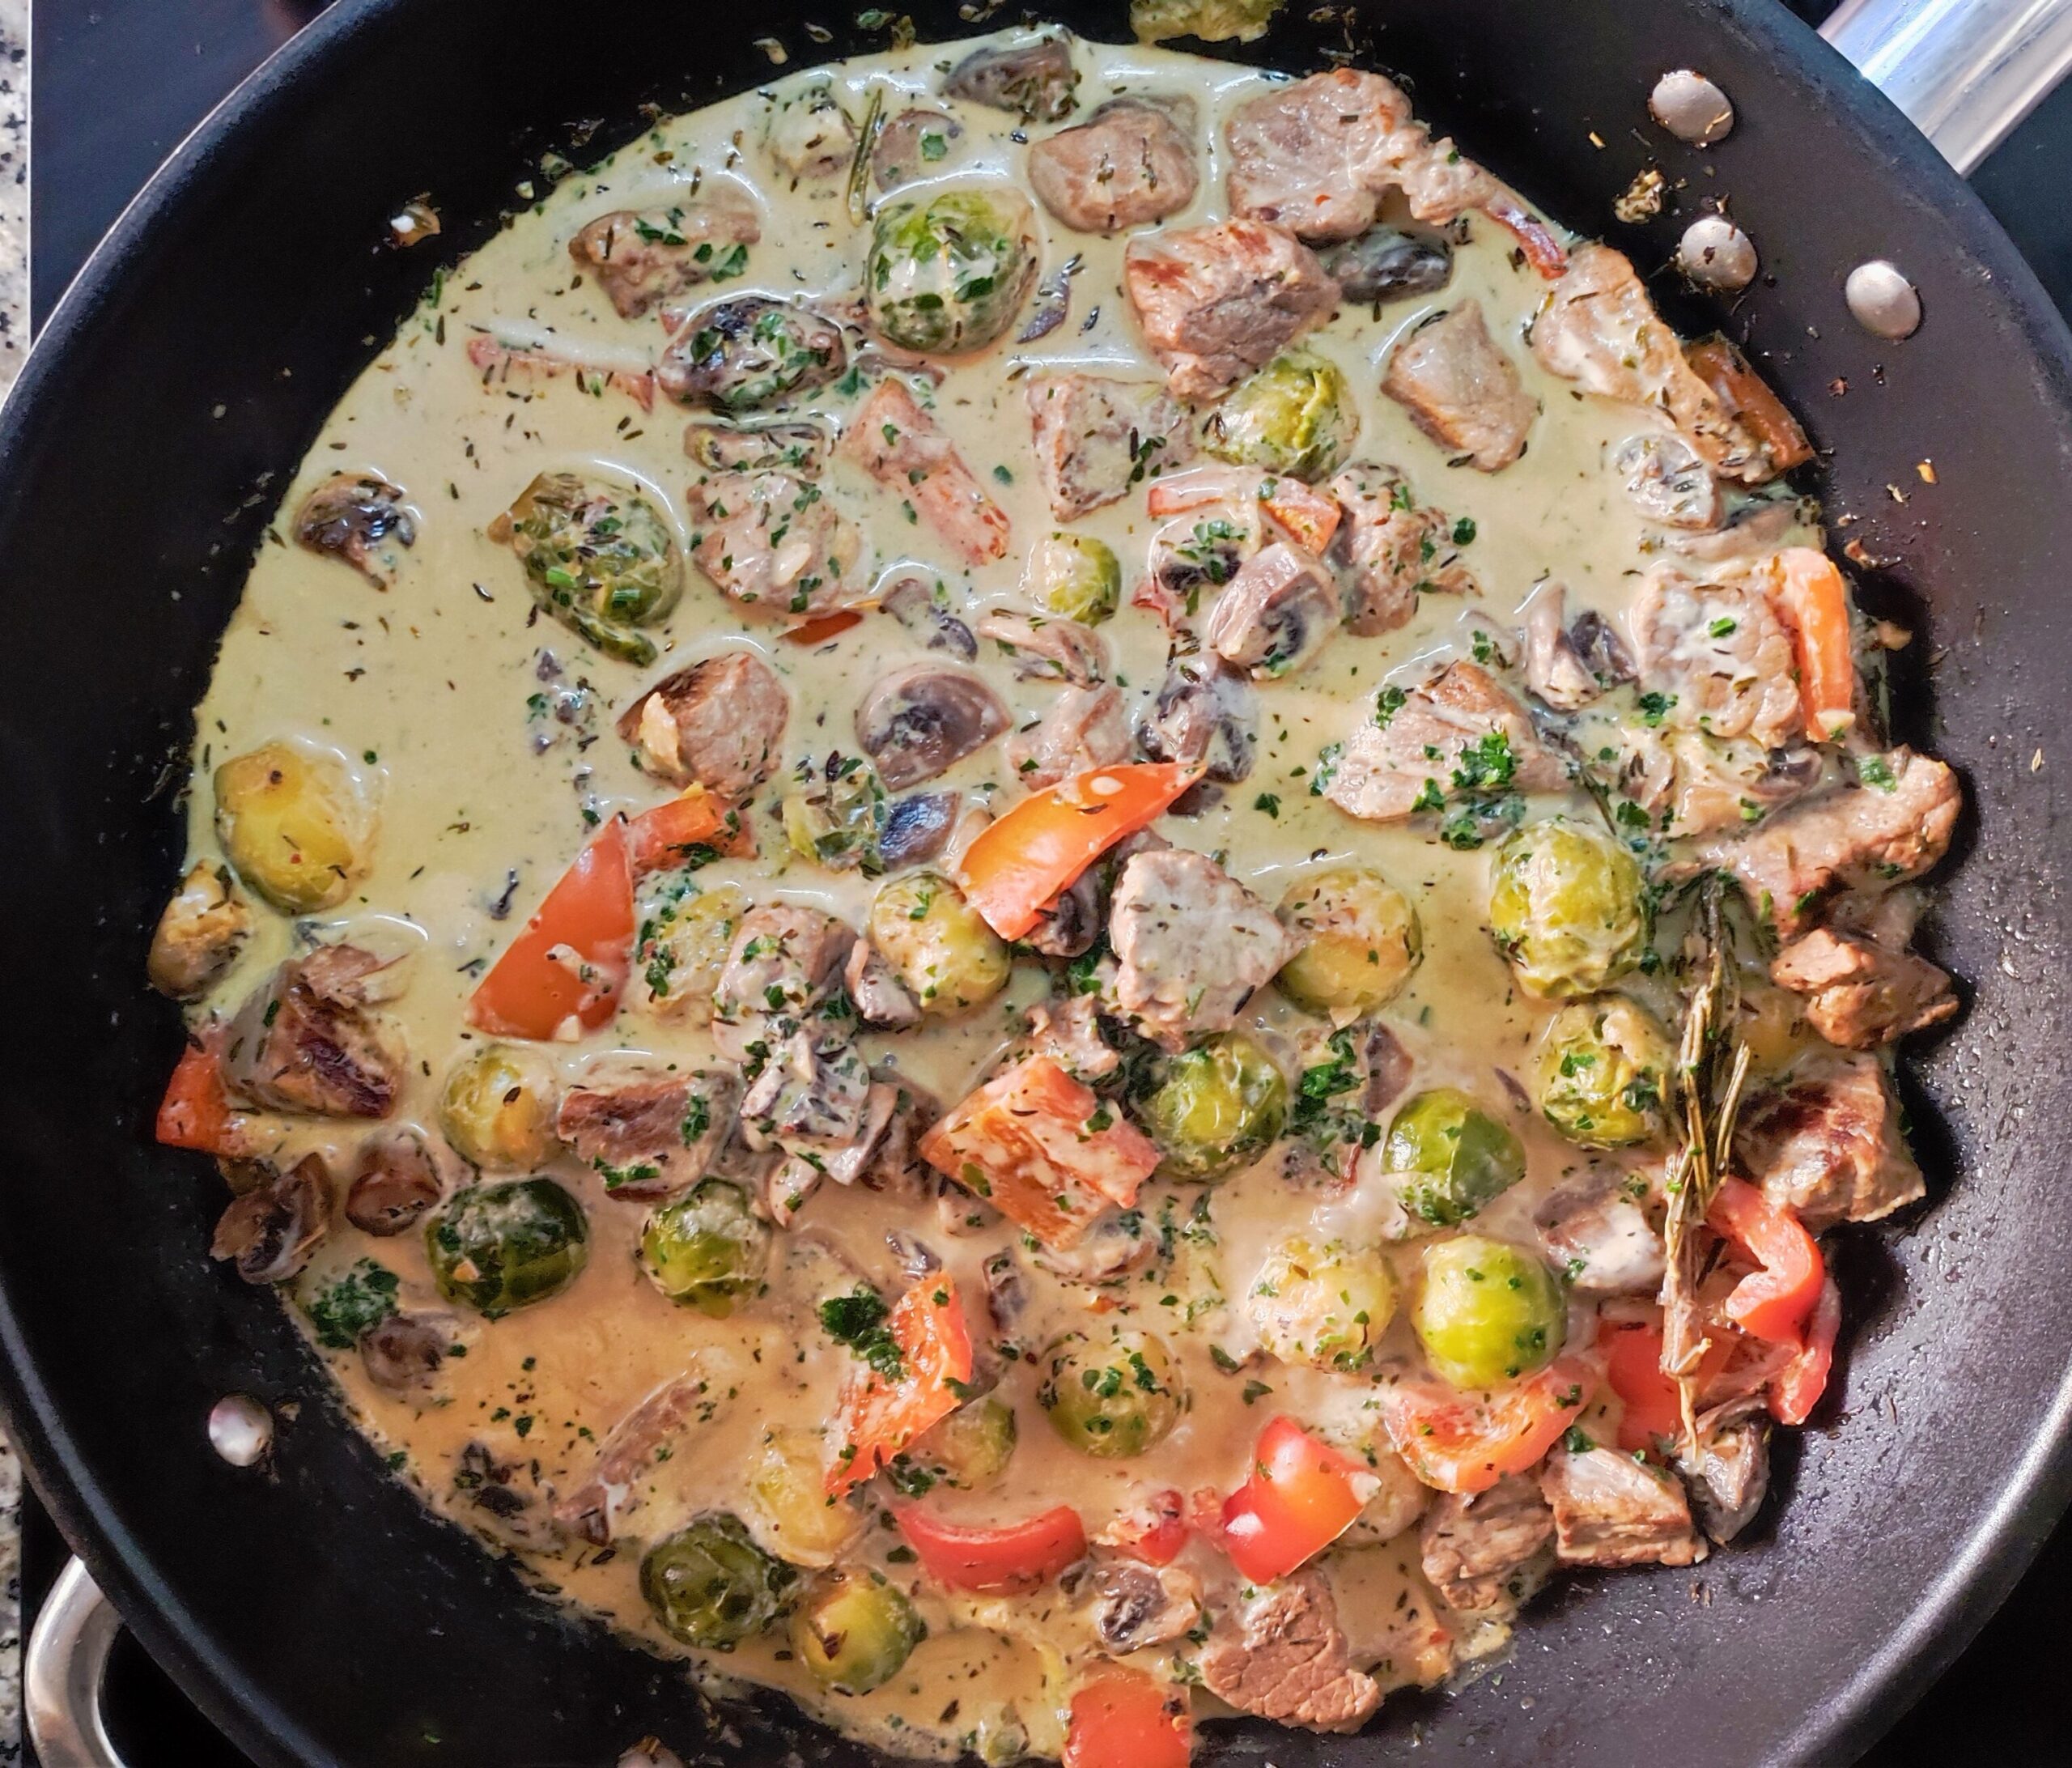 One Pot Beef Stew On The Stove With Mushrooms, Brussels Sprouts, And Bell Peppers